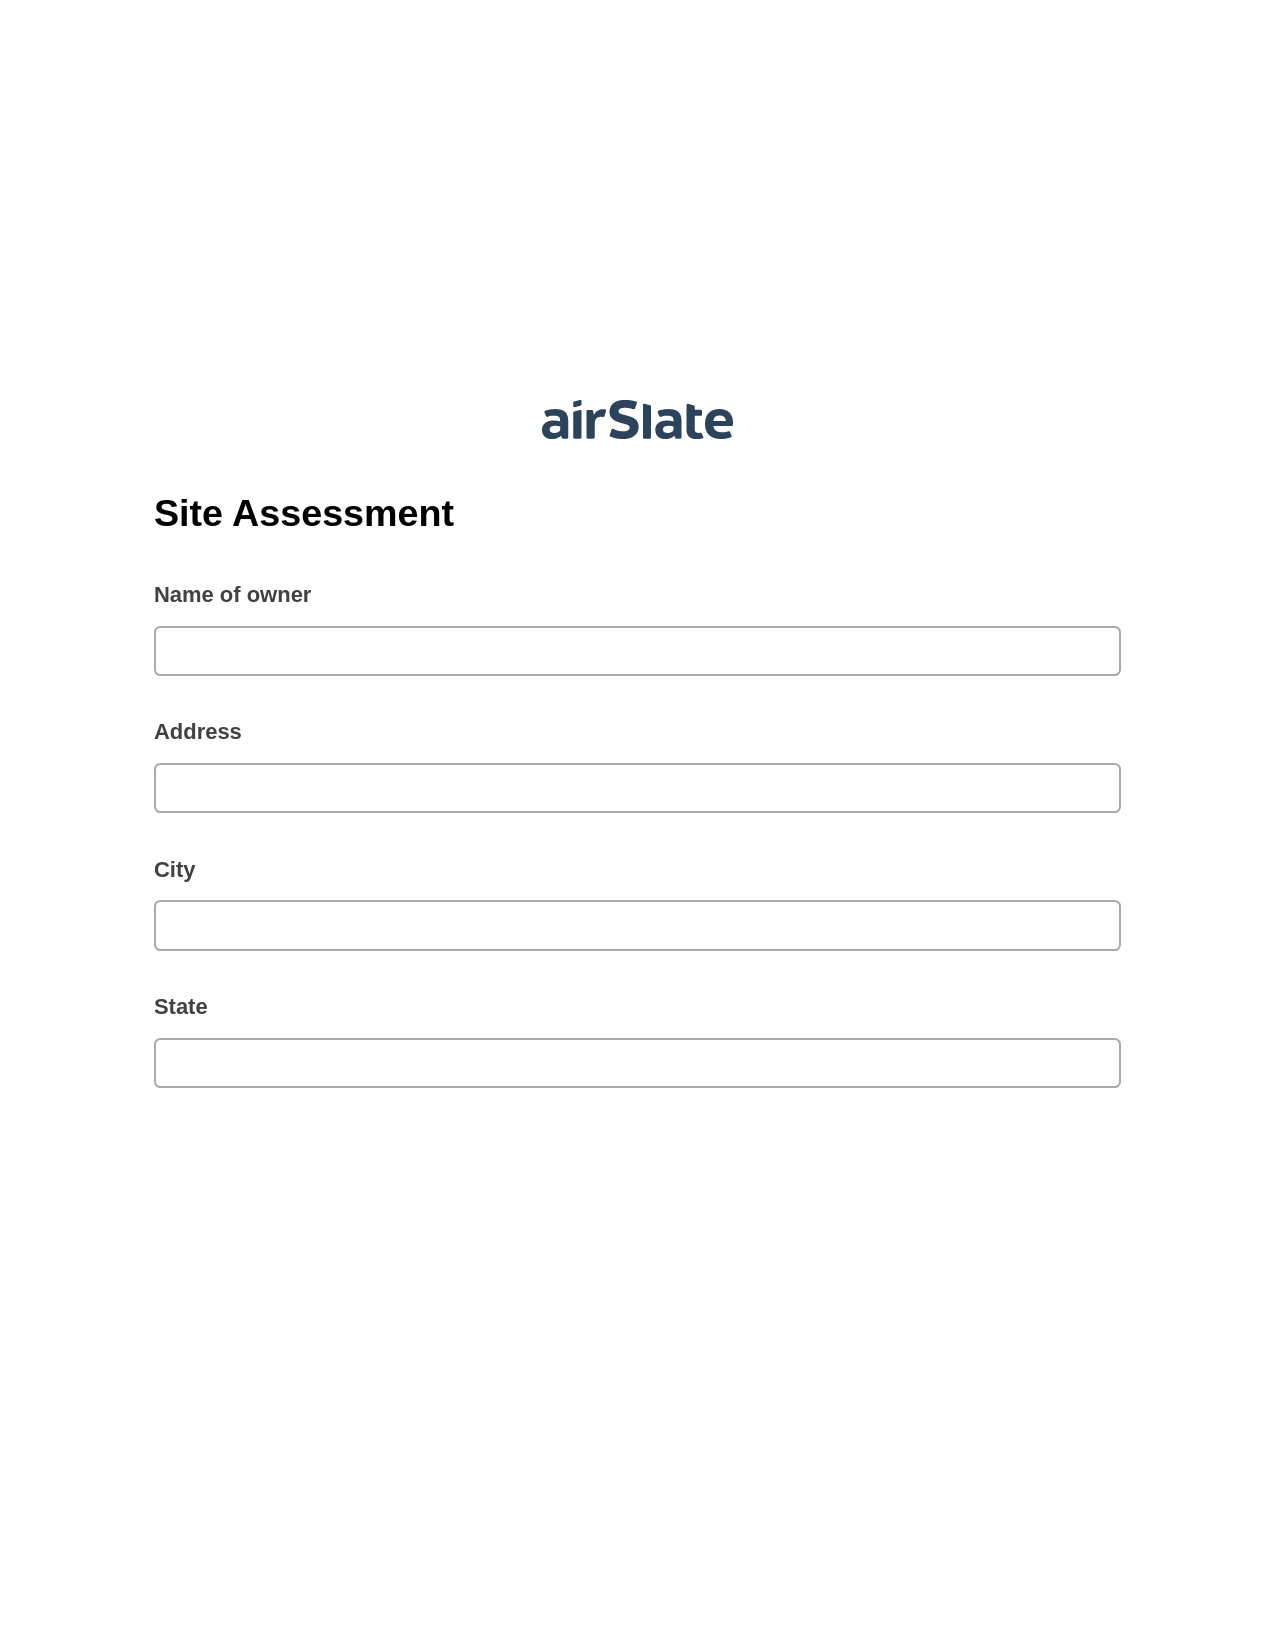 Site Assessment Pre-fill from Salesforce Records with SOQL Bot, Reminder Bot, Slack Two-Way Binding Bot